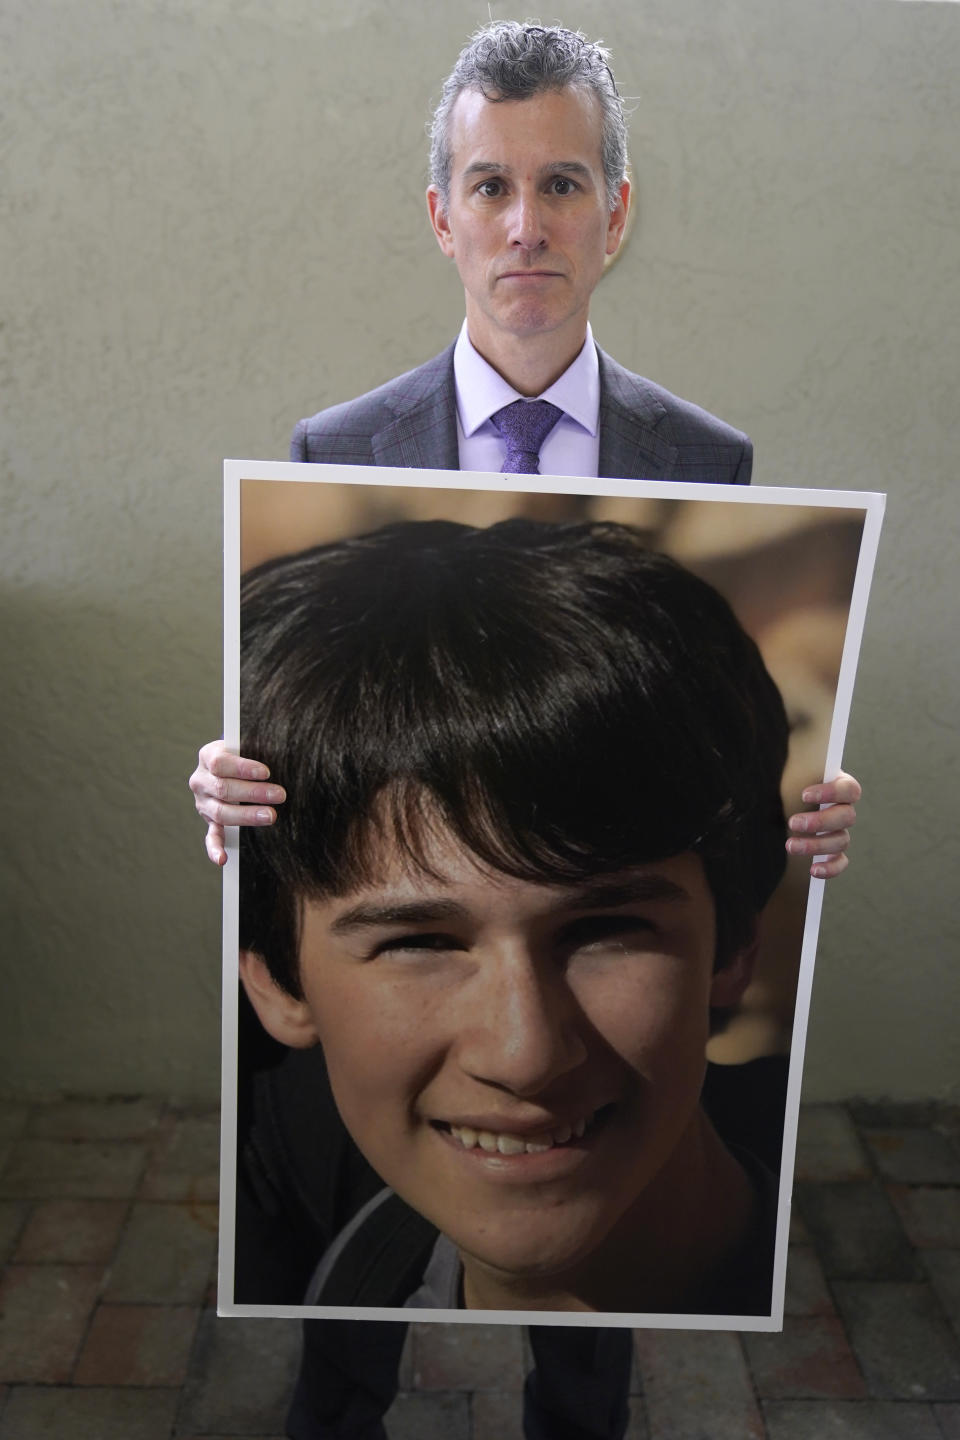 Max Schachter holds a photo of his son, Alex, during an interview, Monday, Jan. 30, 2023, at his home in Coral Springs, Fla. After Alex was killed at Parkland's Marjory Stoneman Douglas High School shooting five years ago, Schachter ended his insurance practice and made promoting school safety his full-time mission. He started Safe Schools for Alex. The foundation's website also has a dashboard where parents in several states can examine safety data for their child's school. (AP Photo/Wilfredo Lee)